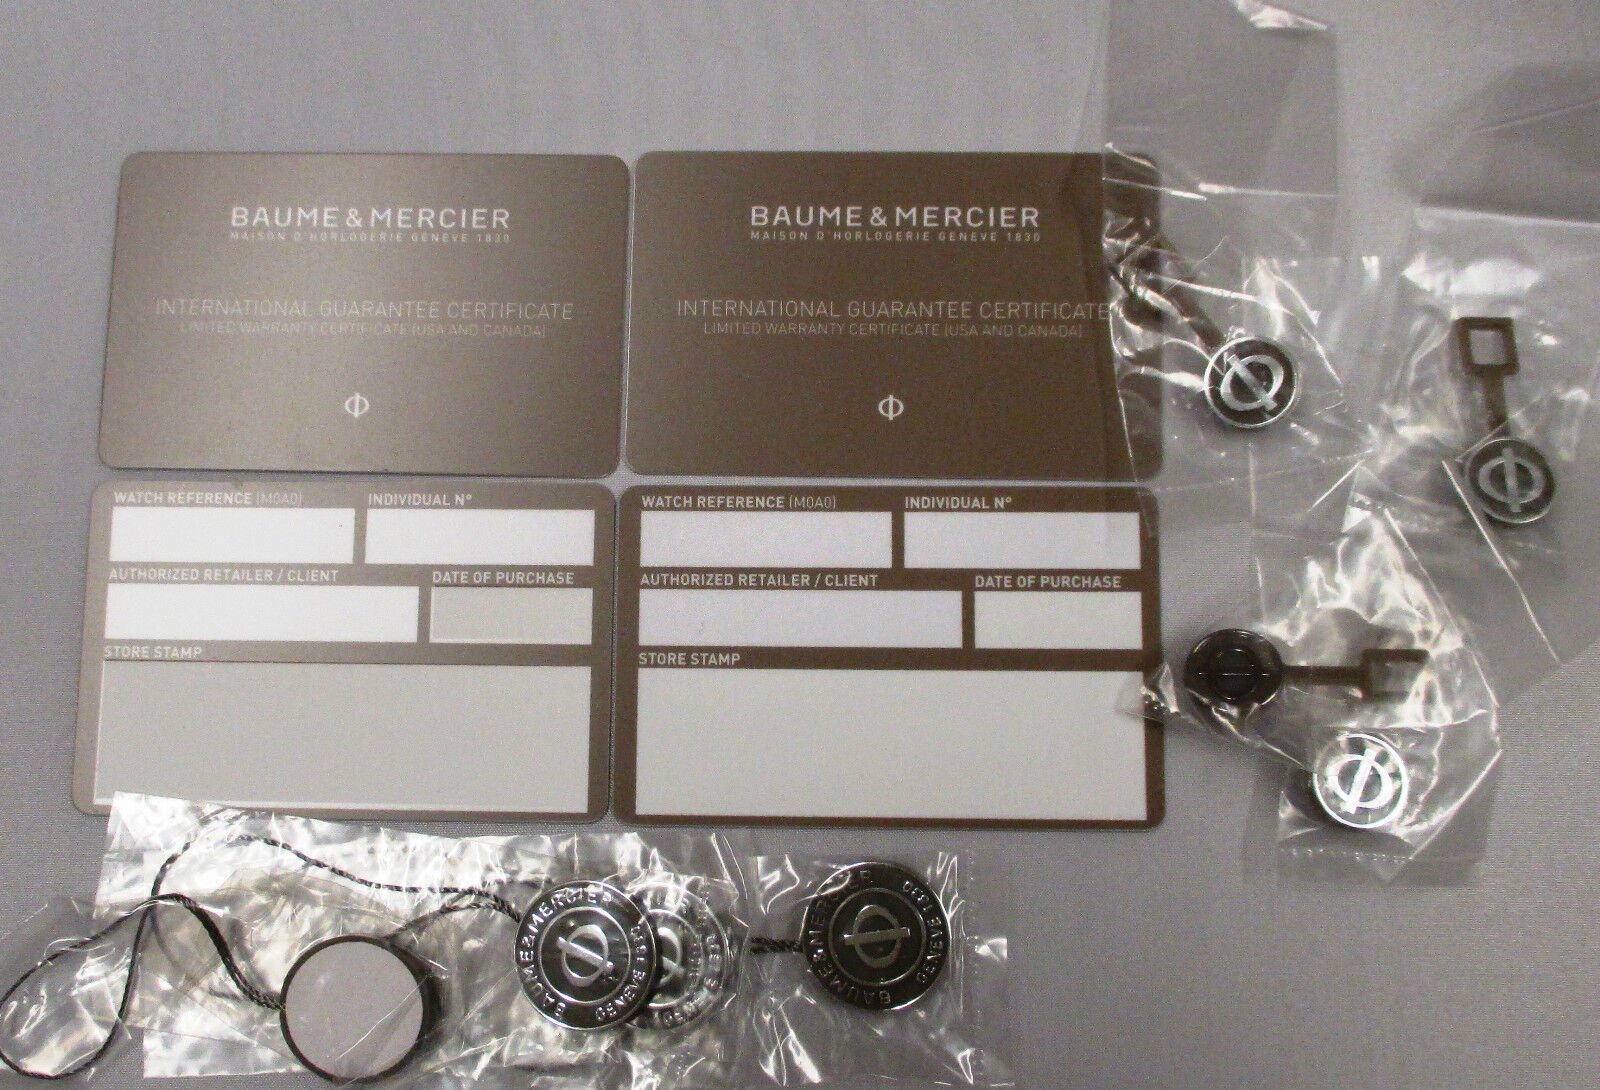 4 Baume & Mercier Watch Guarantee and Limited Warranty Certificate Cards & Tags